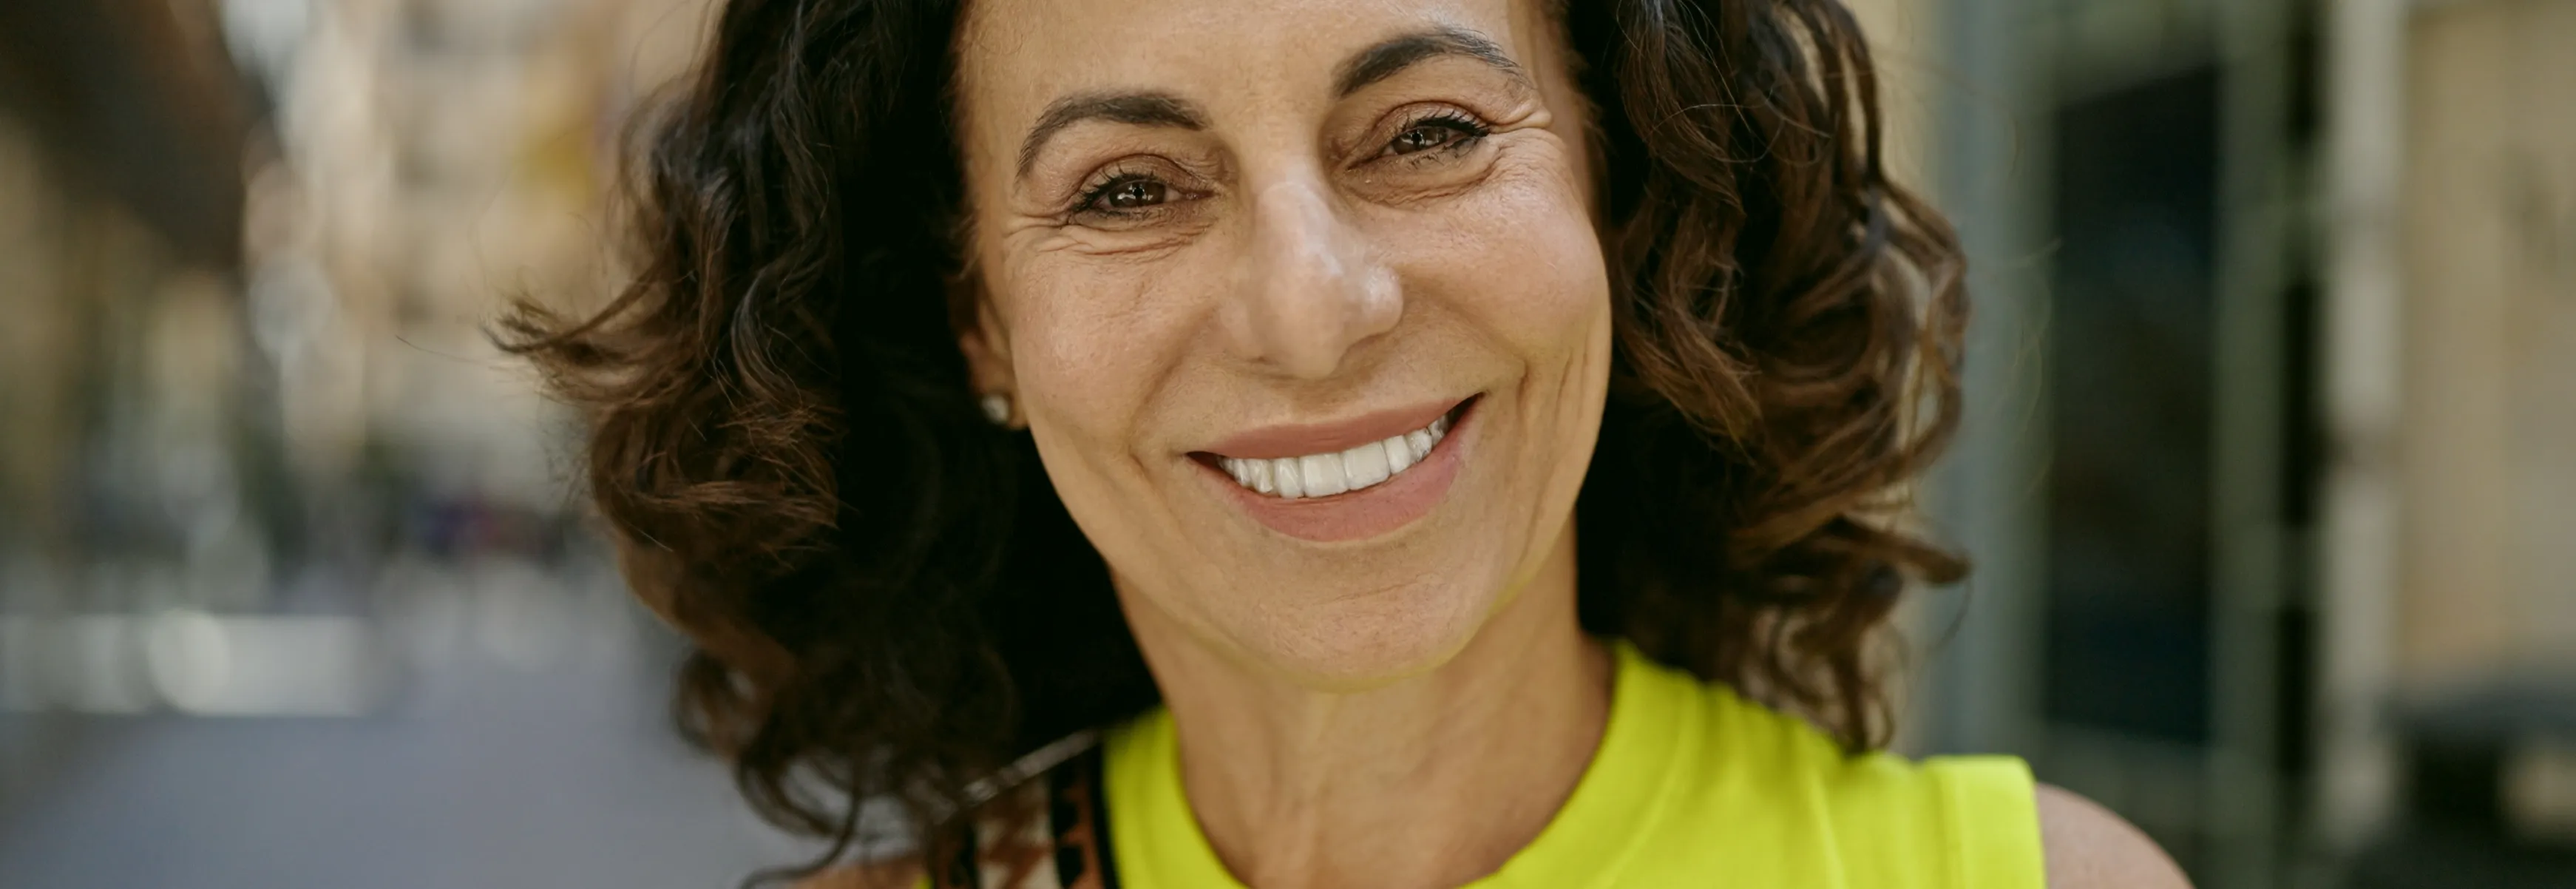 a close up of a woman smiling